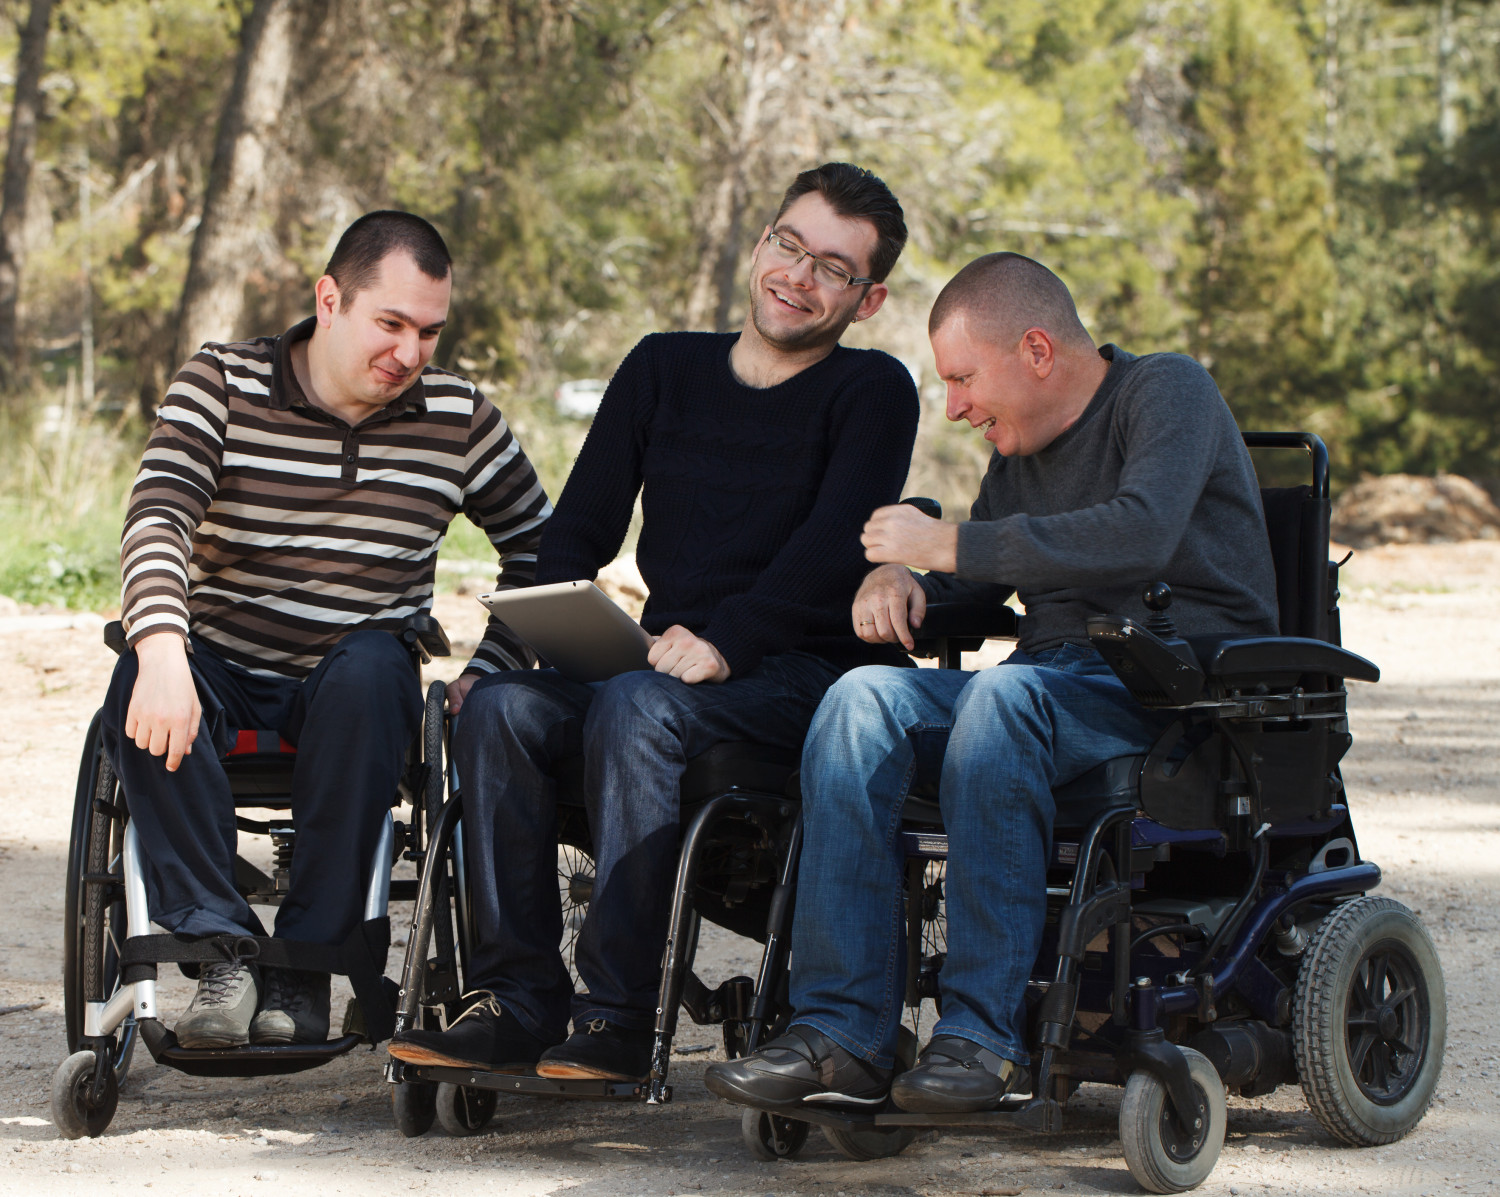 Three men, using wheelchairs, sharing a laugh while looking at a tablet outdoors, showcasing camaraderie in supported independent living